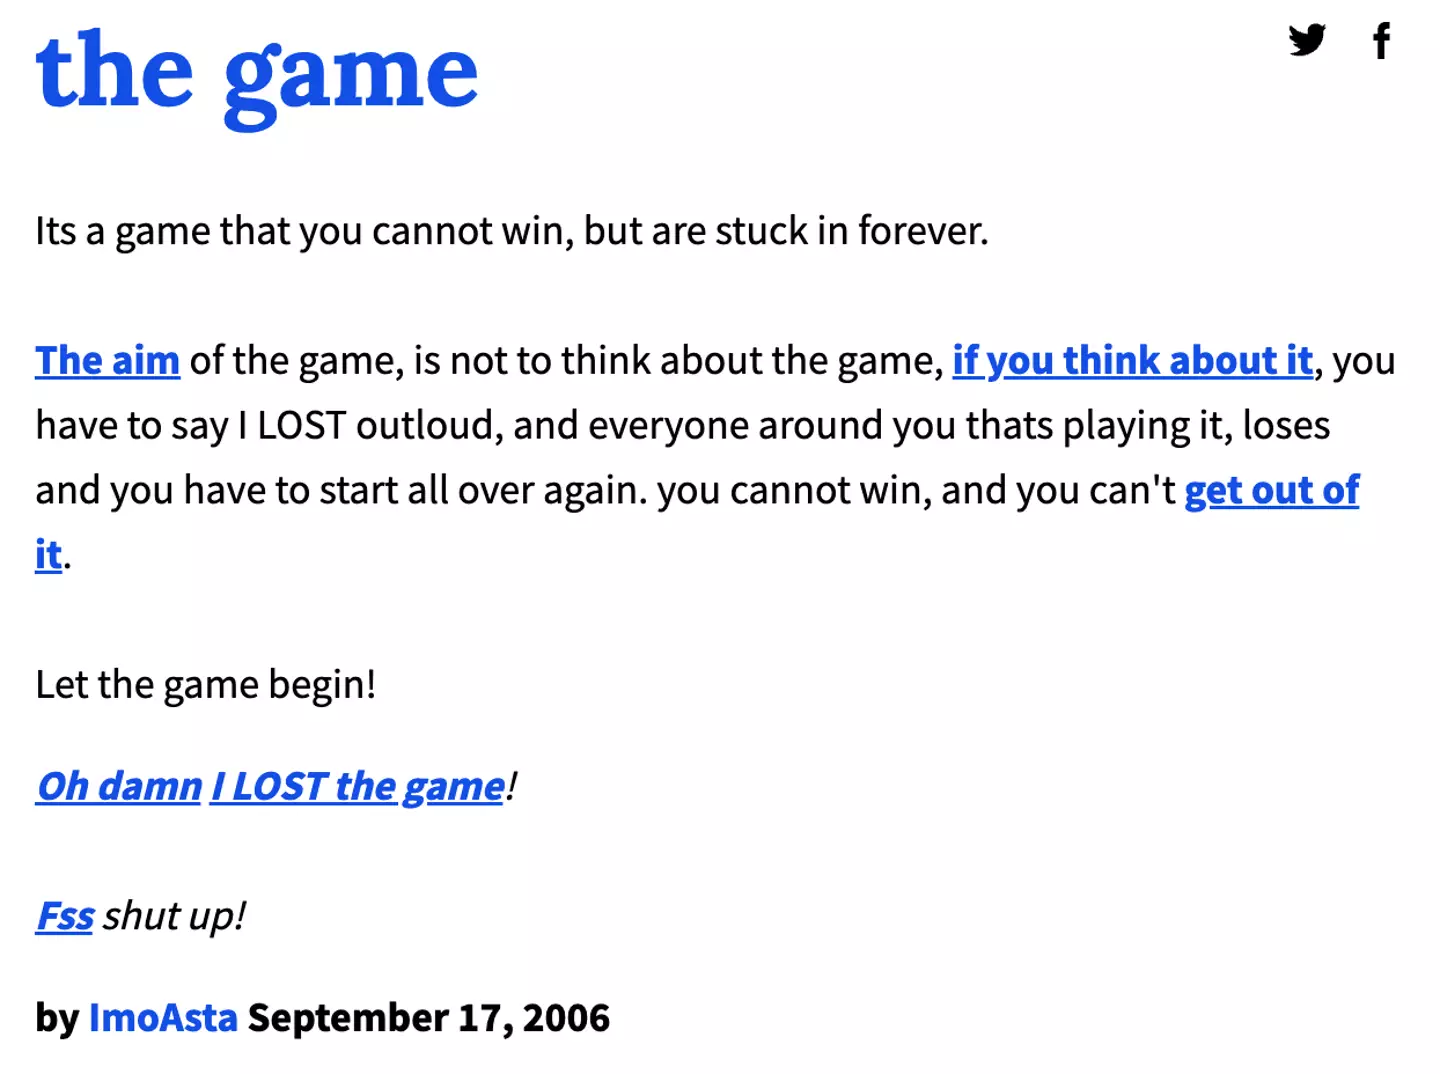 There are a number of entries for the game on Urban Dictionary.